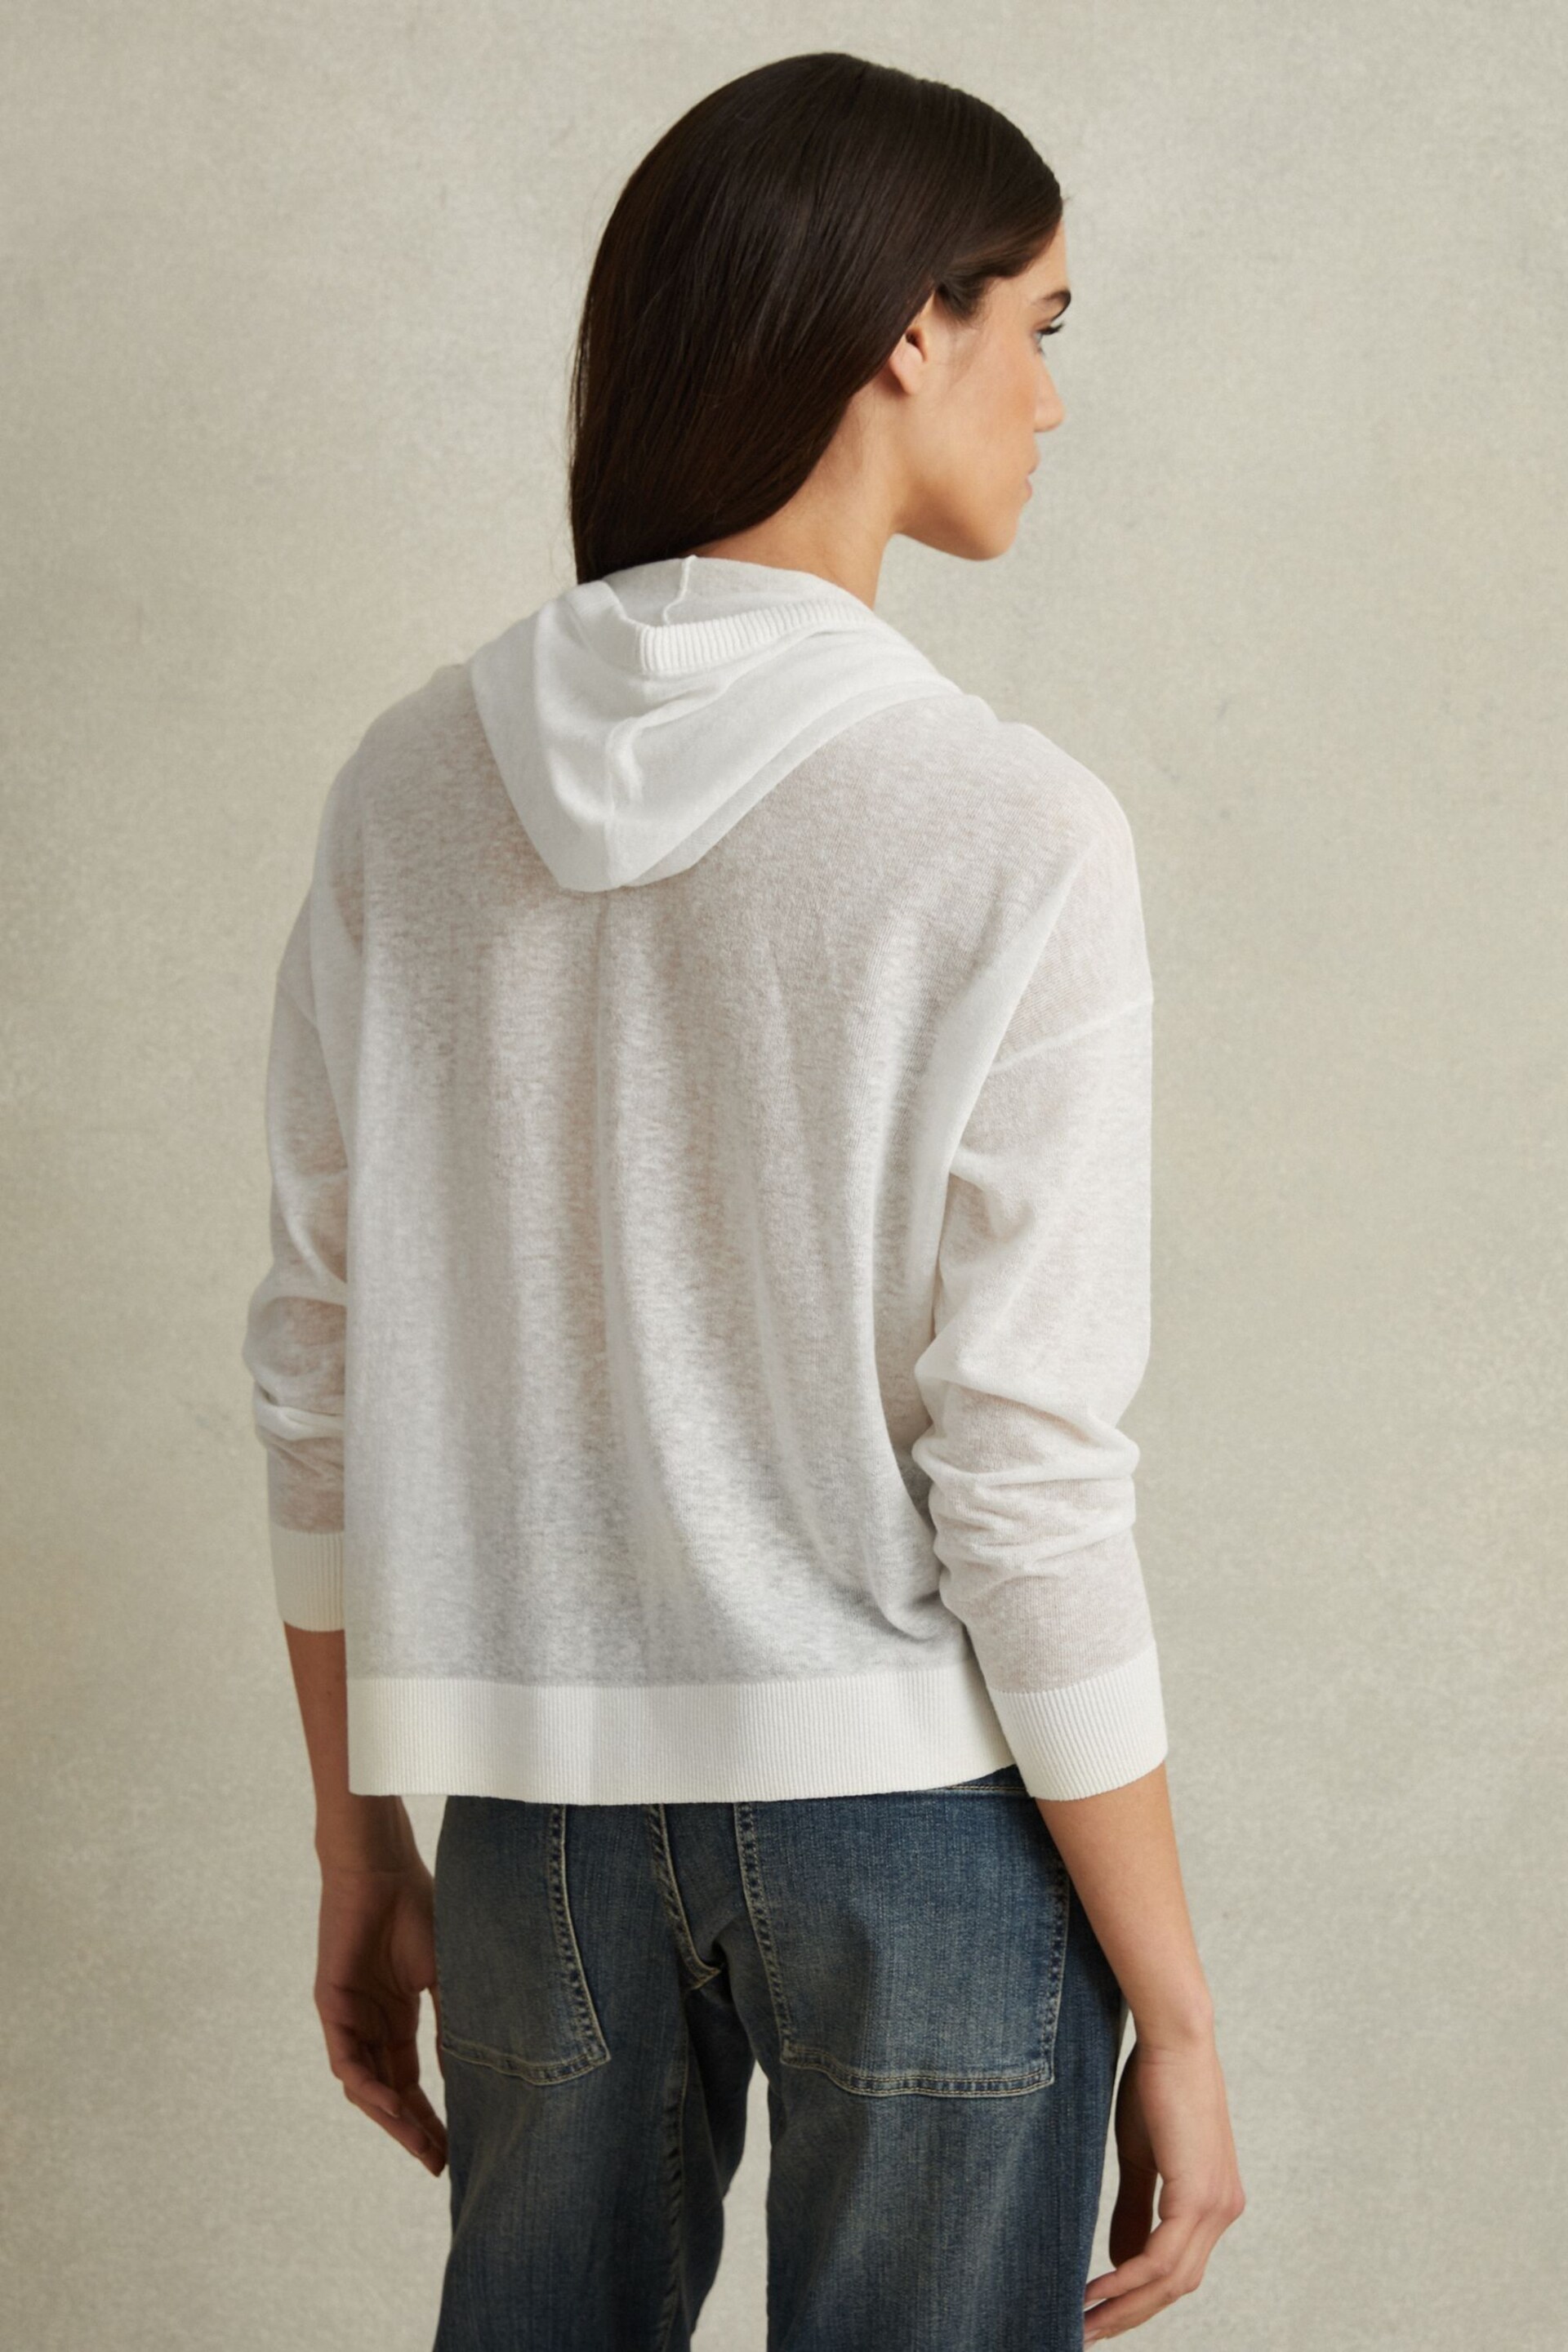 Reiss Ivory Candy Cotton Blend Sheer Hoodie - Image 4 of 4